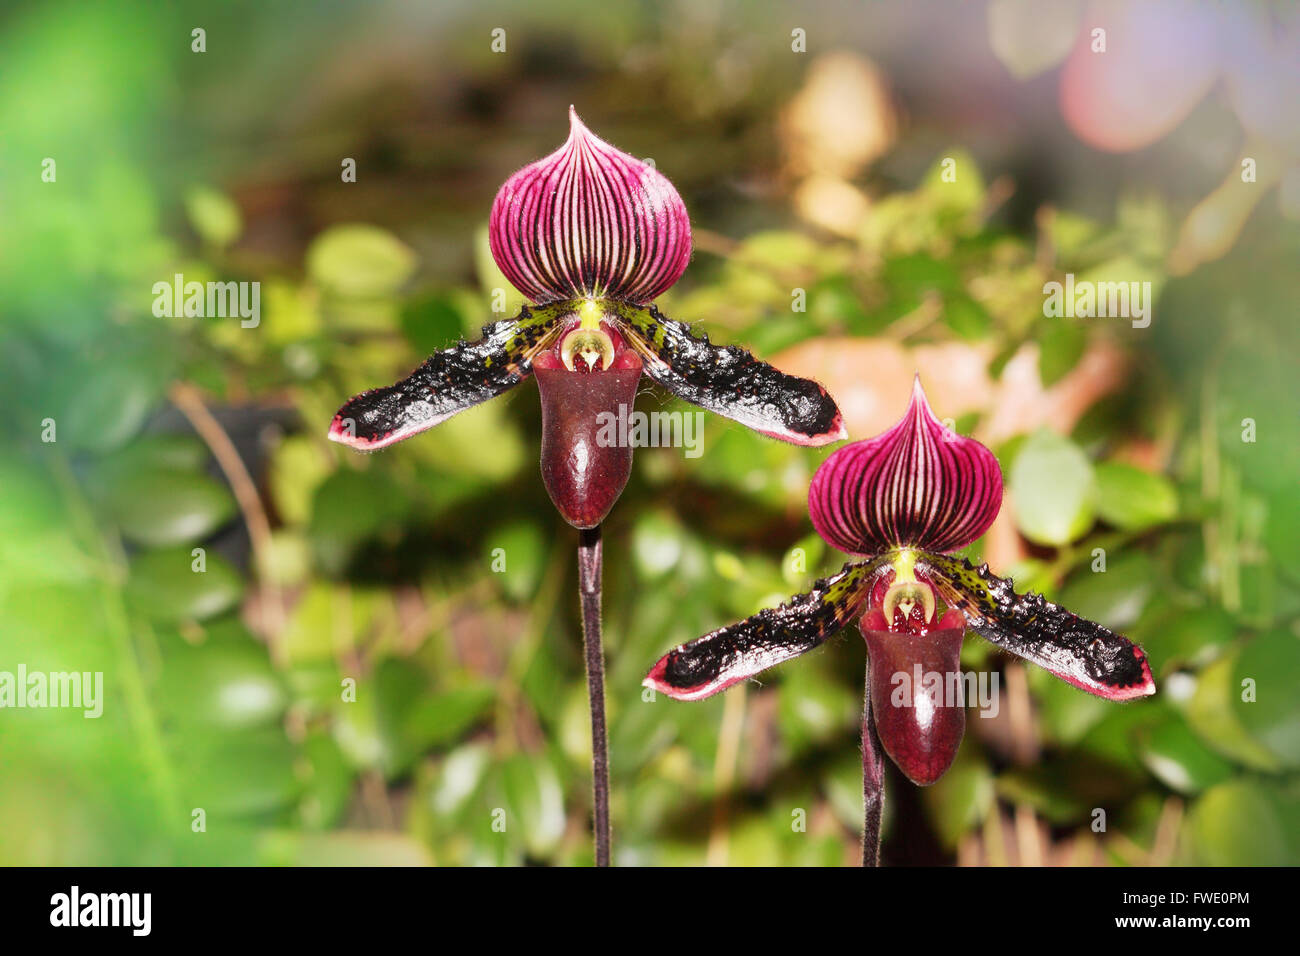 Paphiopedilum orchid flower purple color in the plant Stock Photo